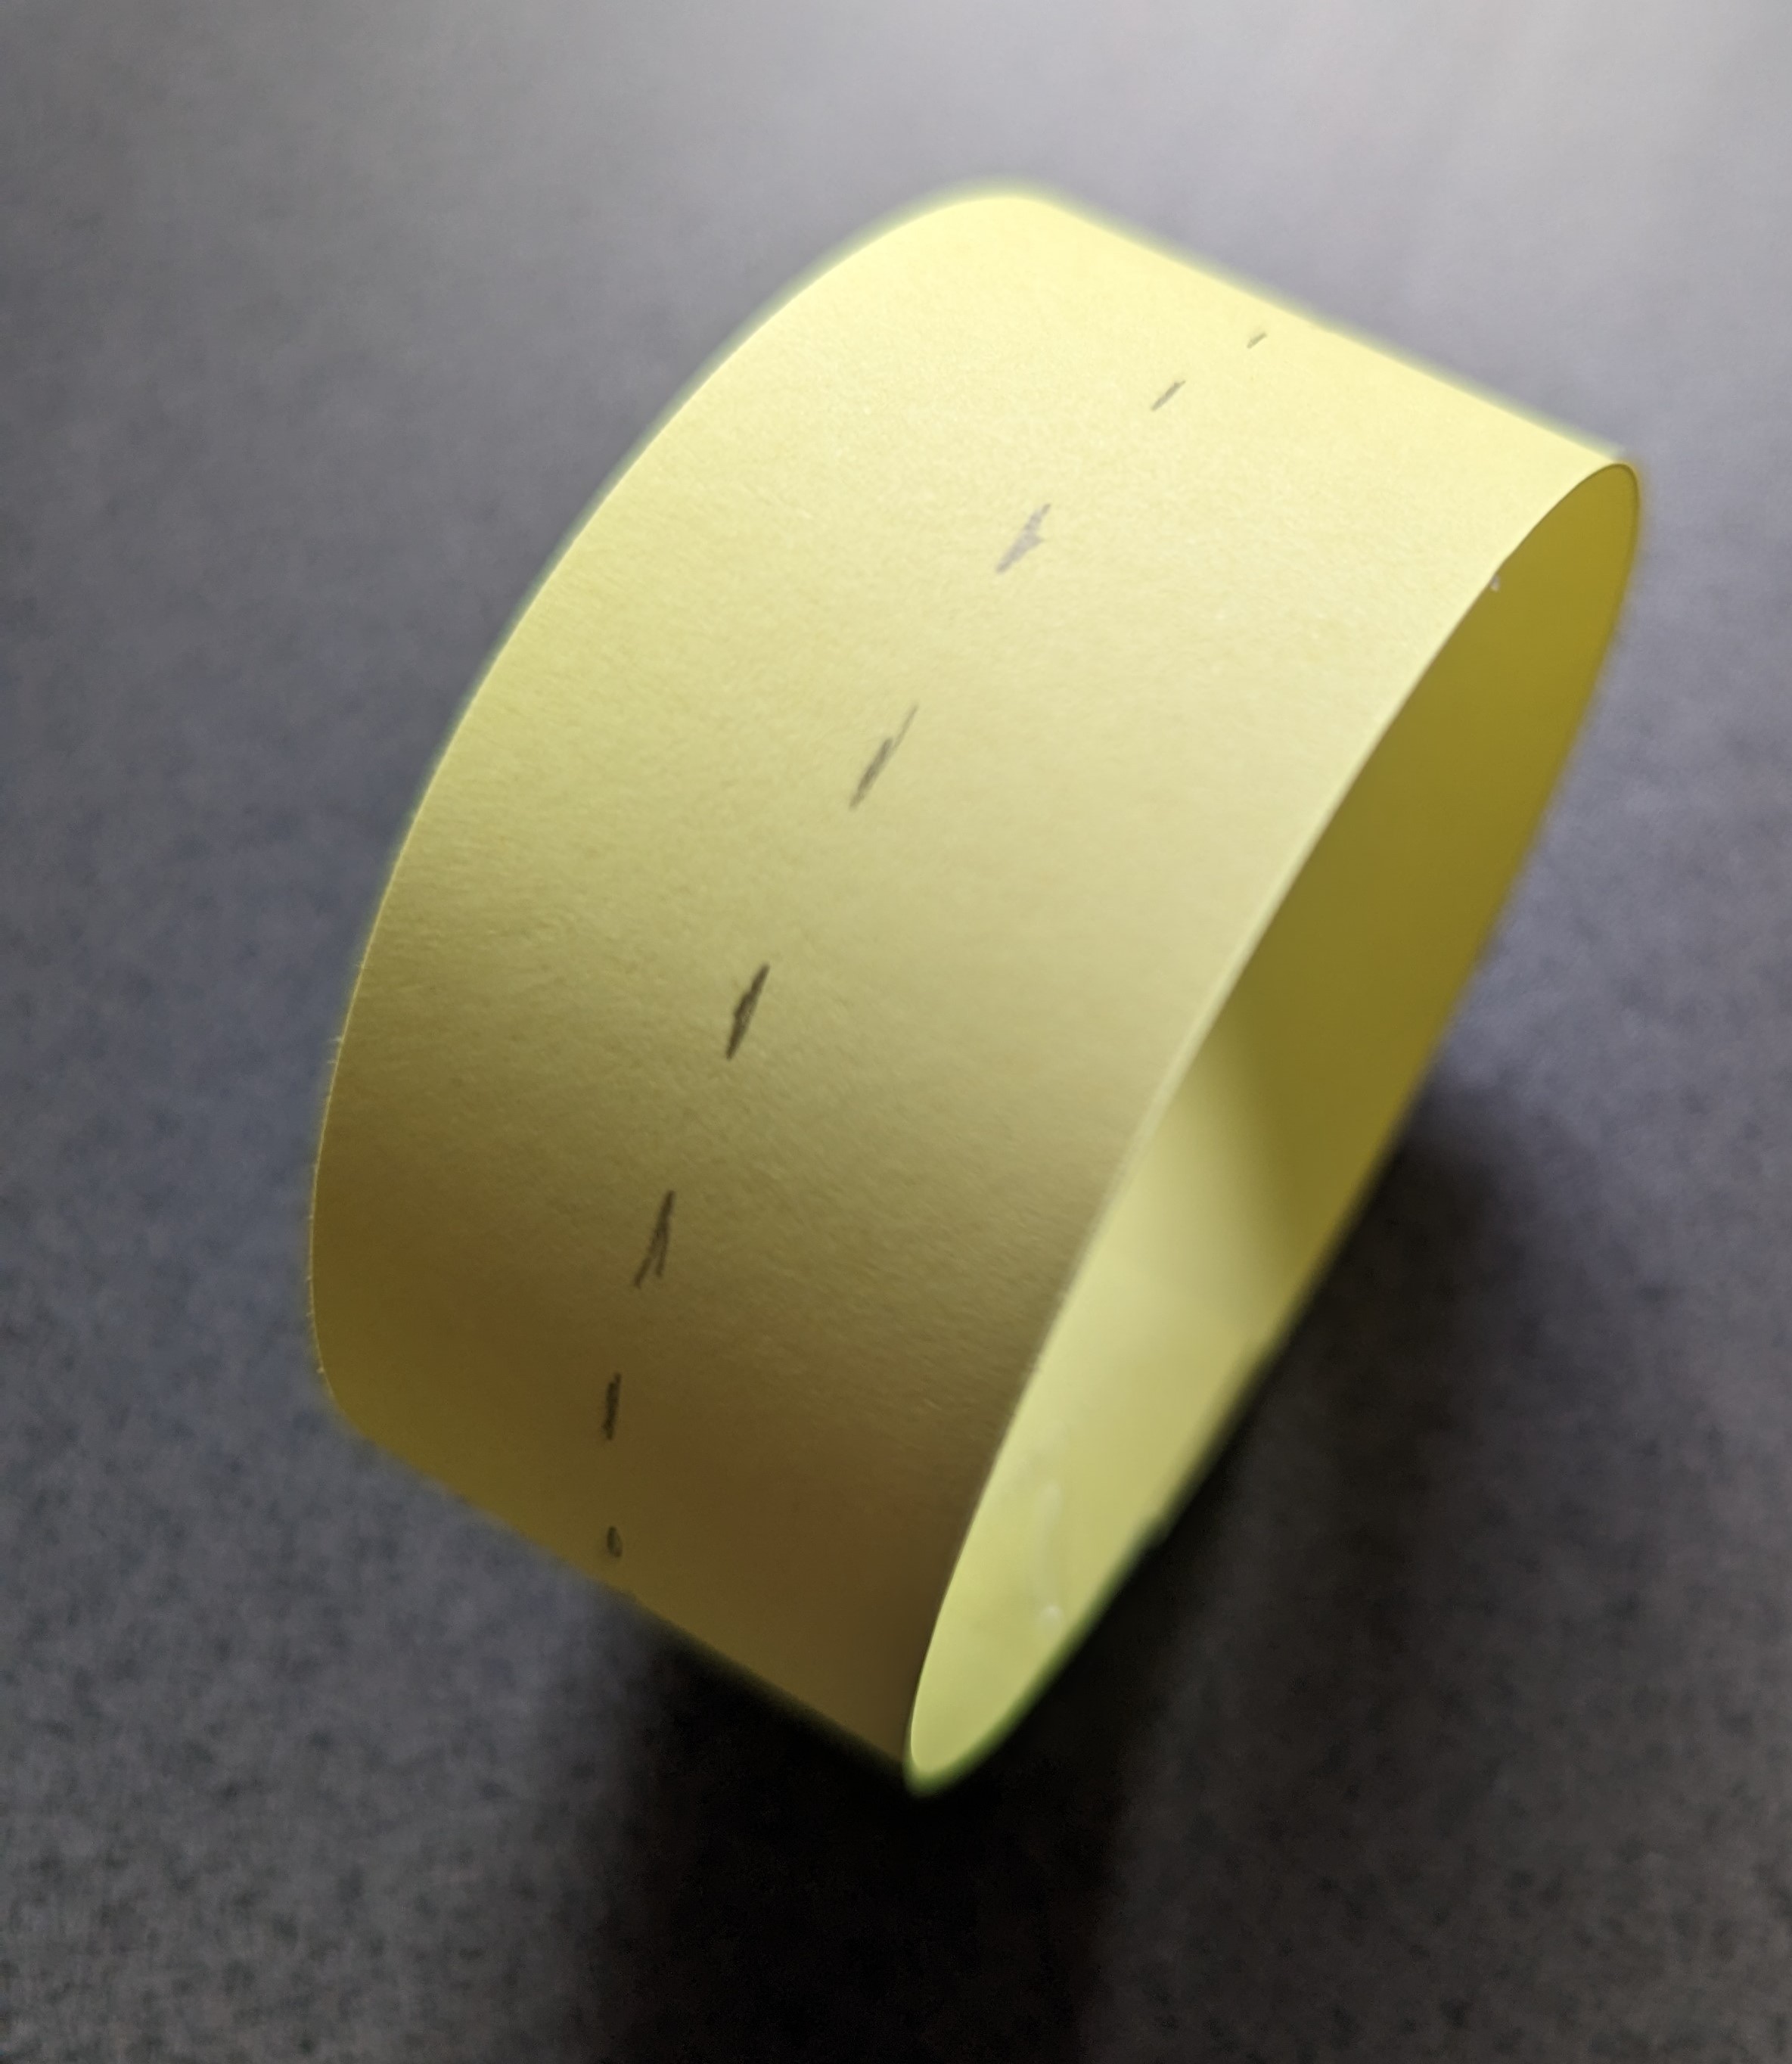 A strip of card connected into a loop with a dashed line drawn around the centre